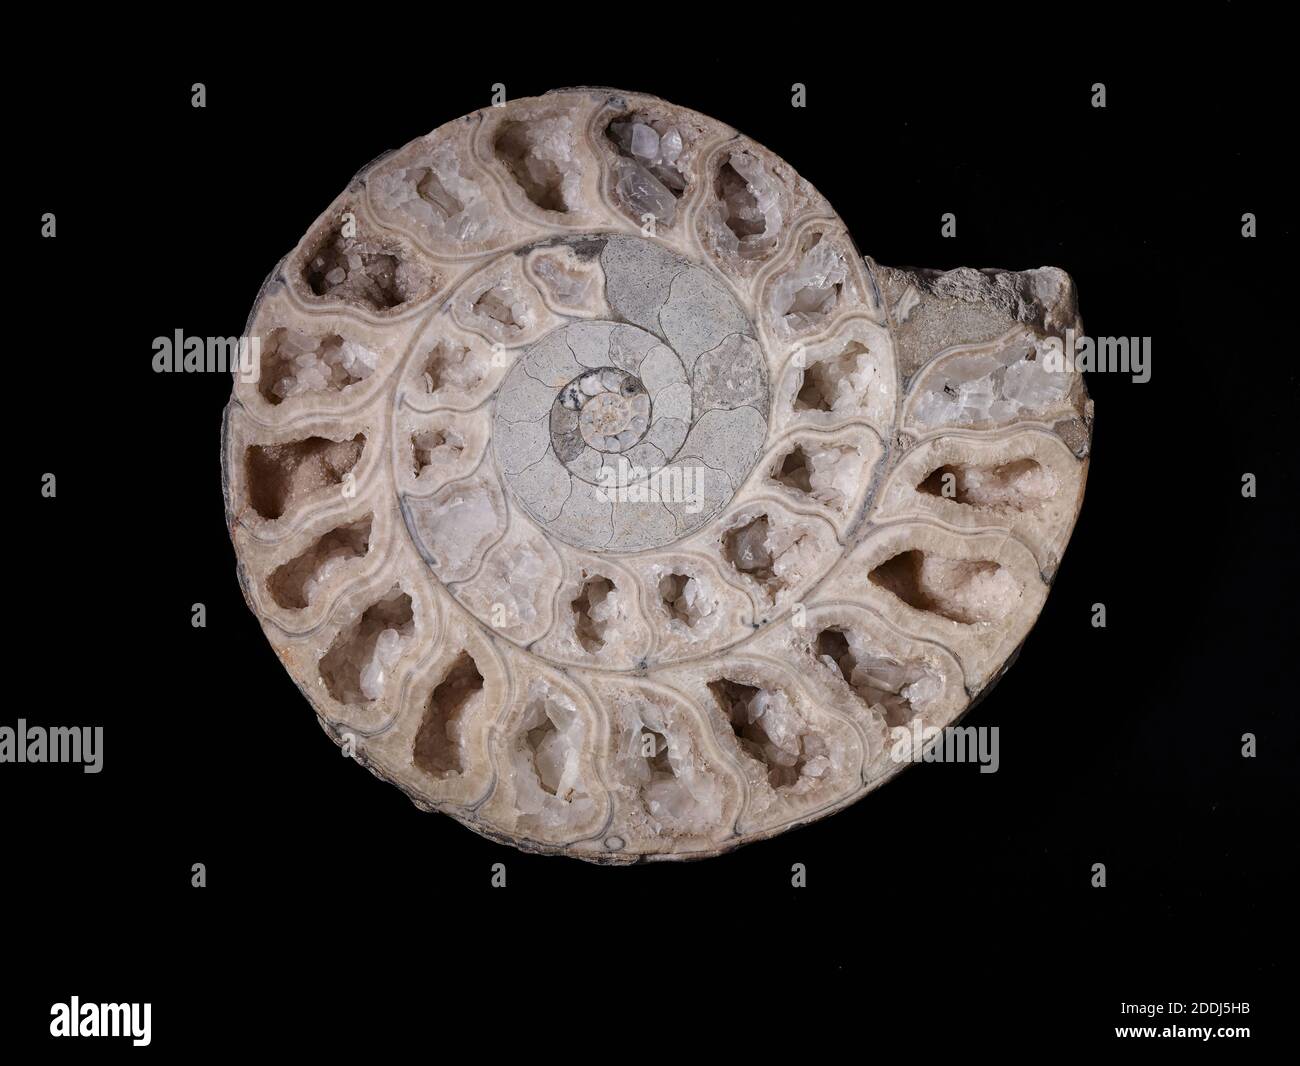 Sectioned Ammonite, Natural Science Collection, Palaeontology Stock Photo